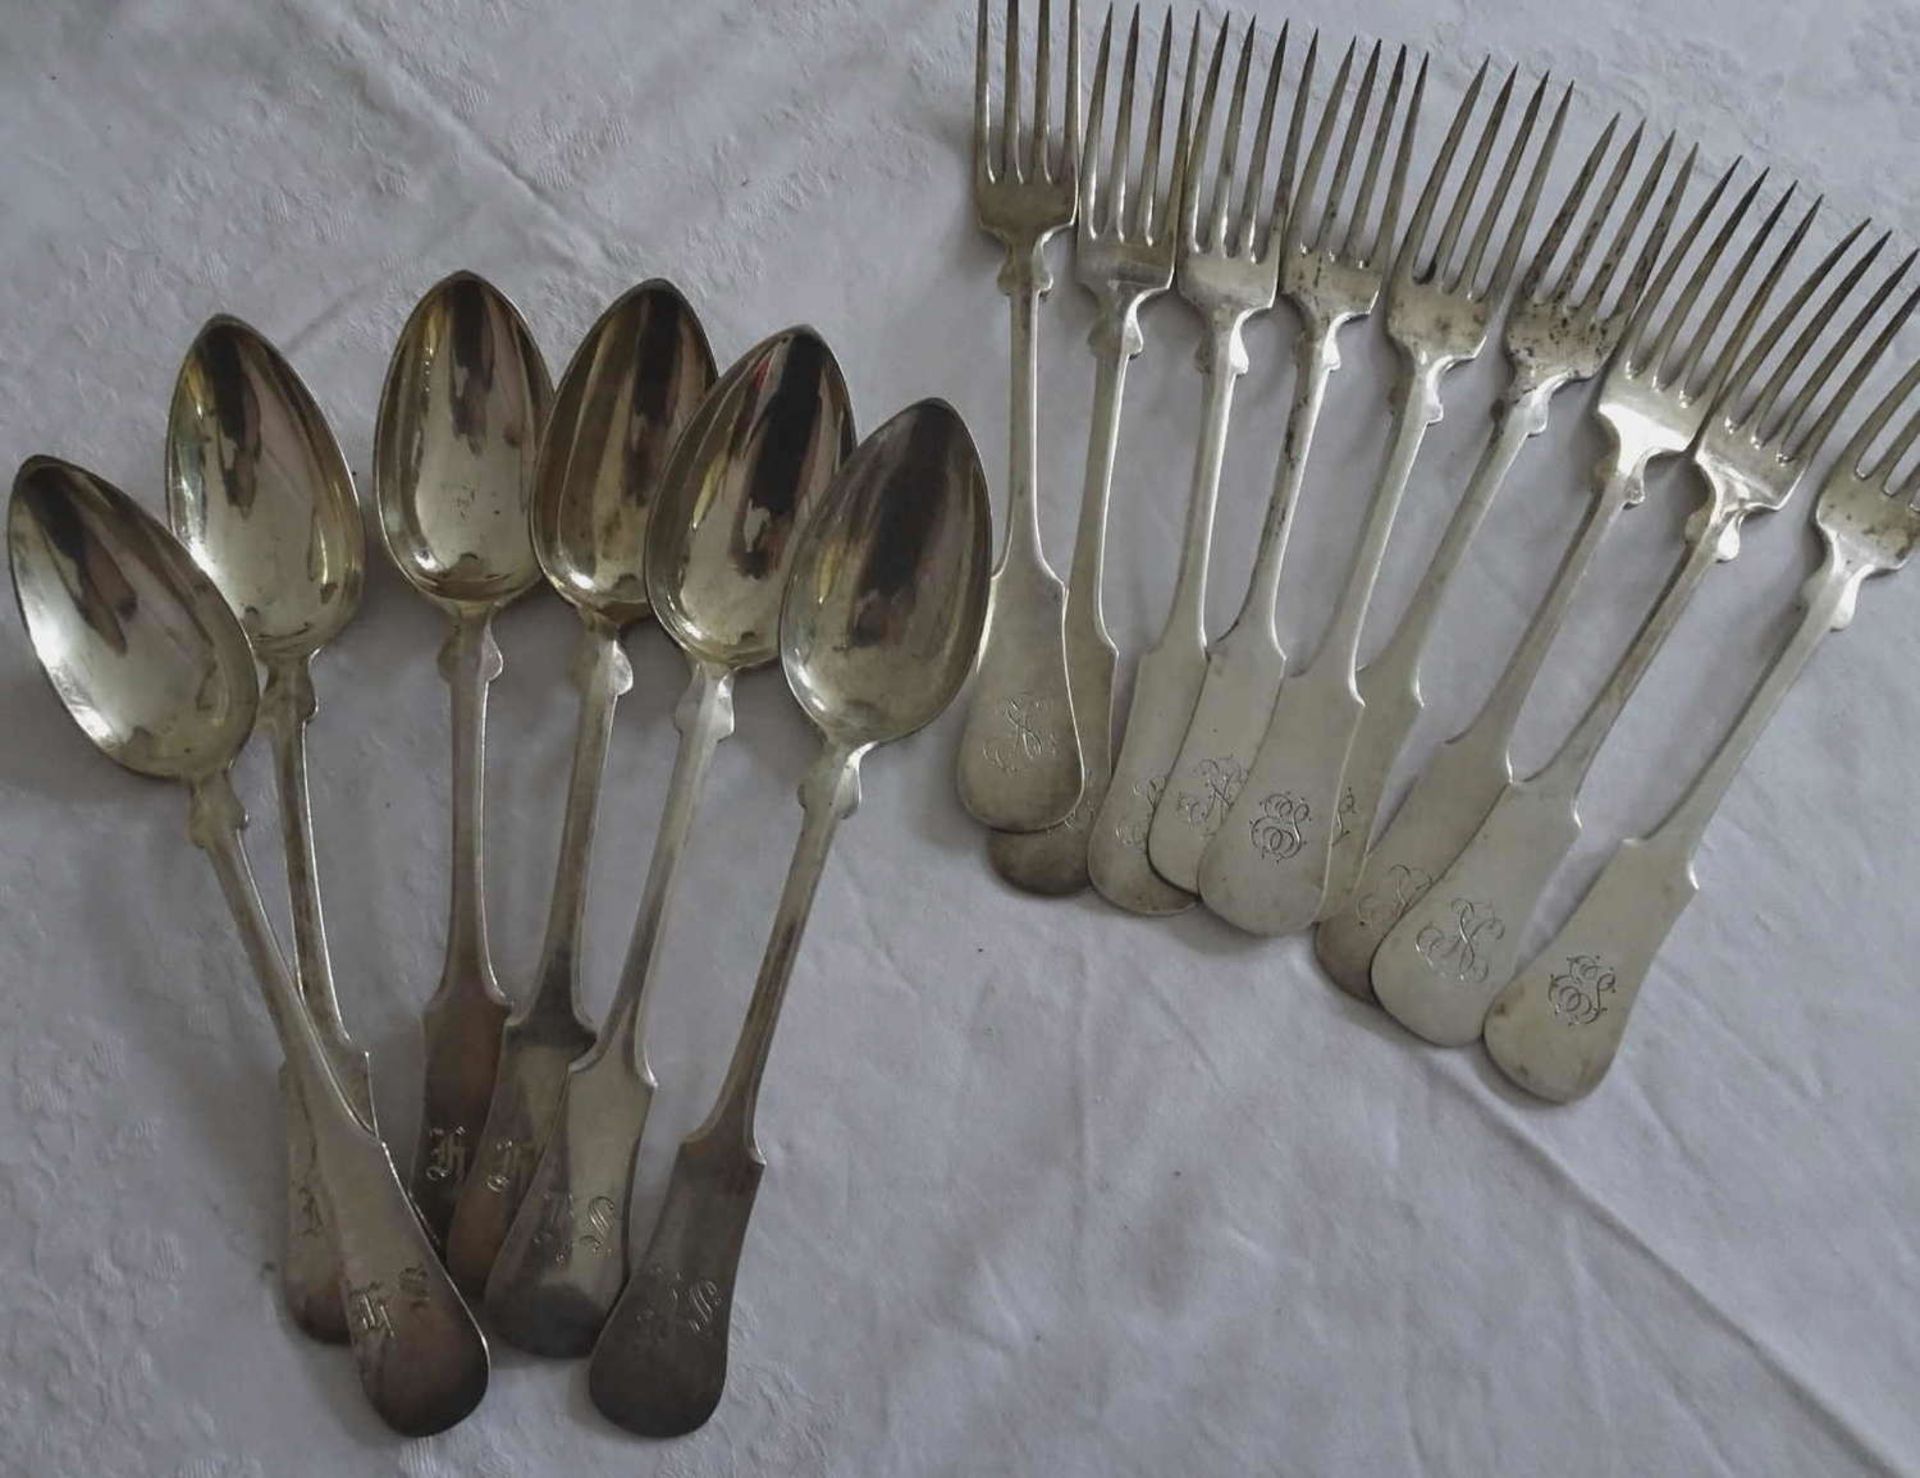 Cutlery pieces, 800 silver, hallmarked with F. Zutter. Same series, a total of 9 forks and 6 soup